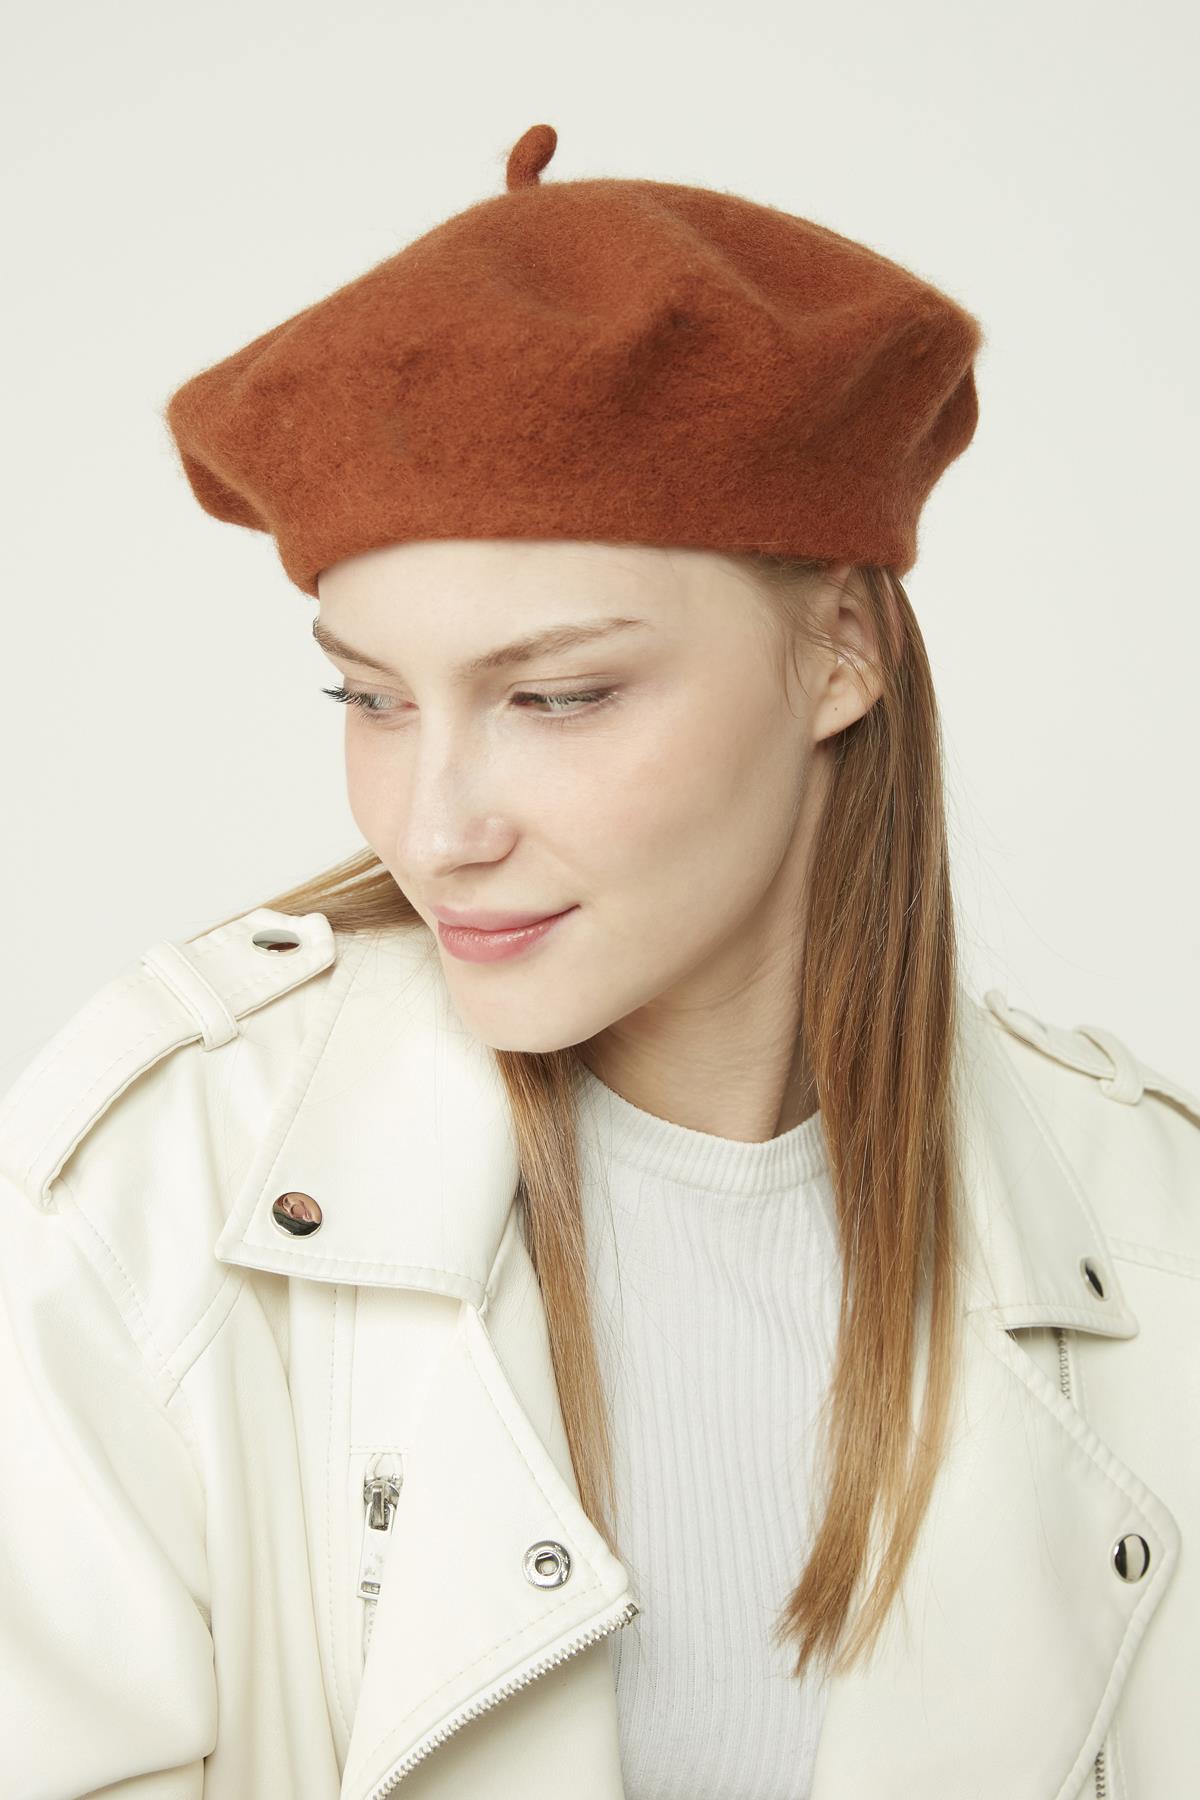 A model wears NSV11160 - Wool Painter Beret - Tile, wholesale Beret of Nesvay to display at Lonca